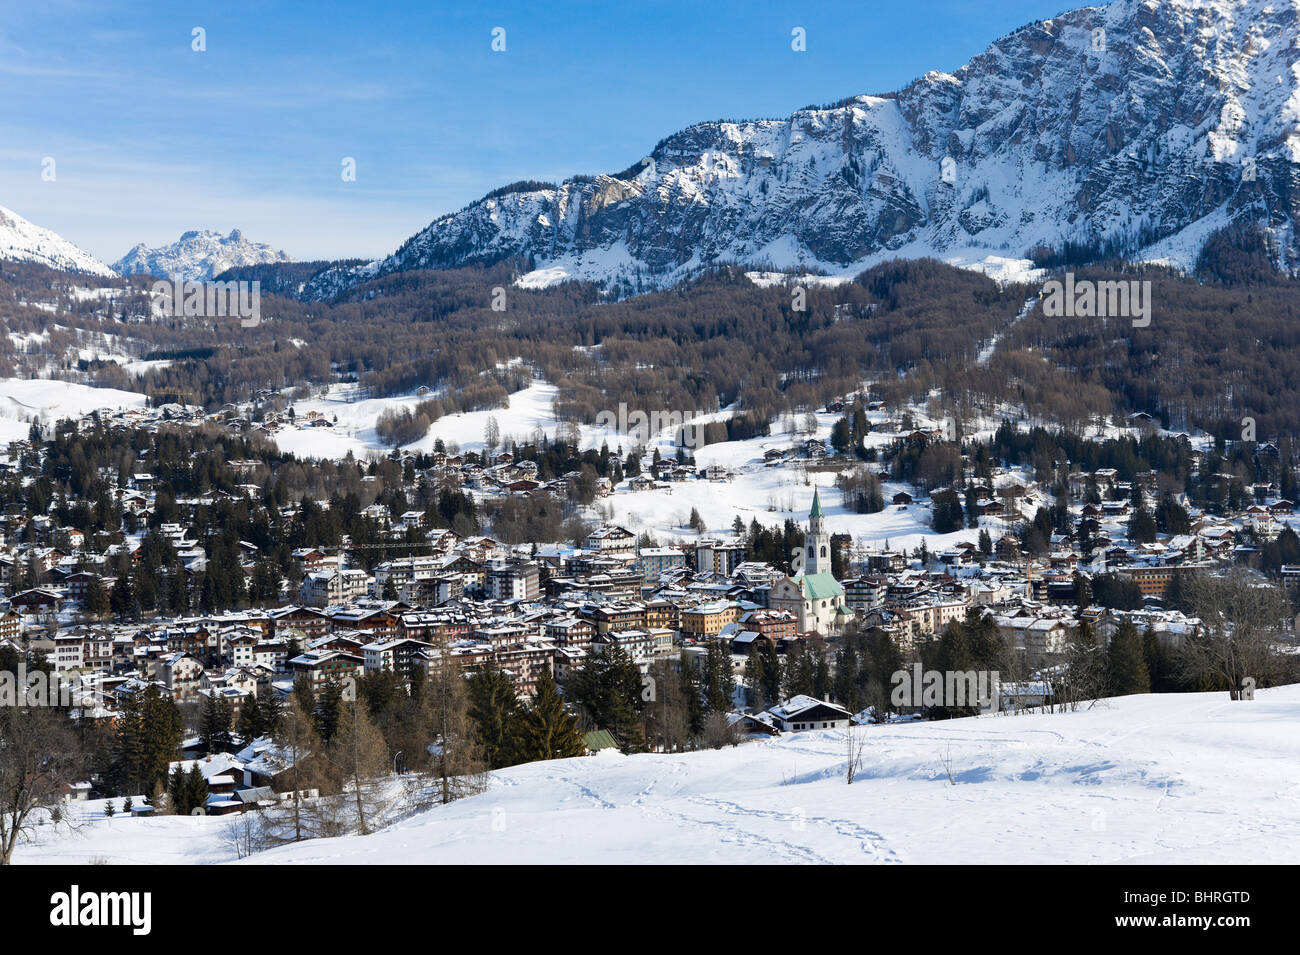 View over the resort of Cortina d'Ampezzo, Dolomites, Italy Stock Photo